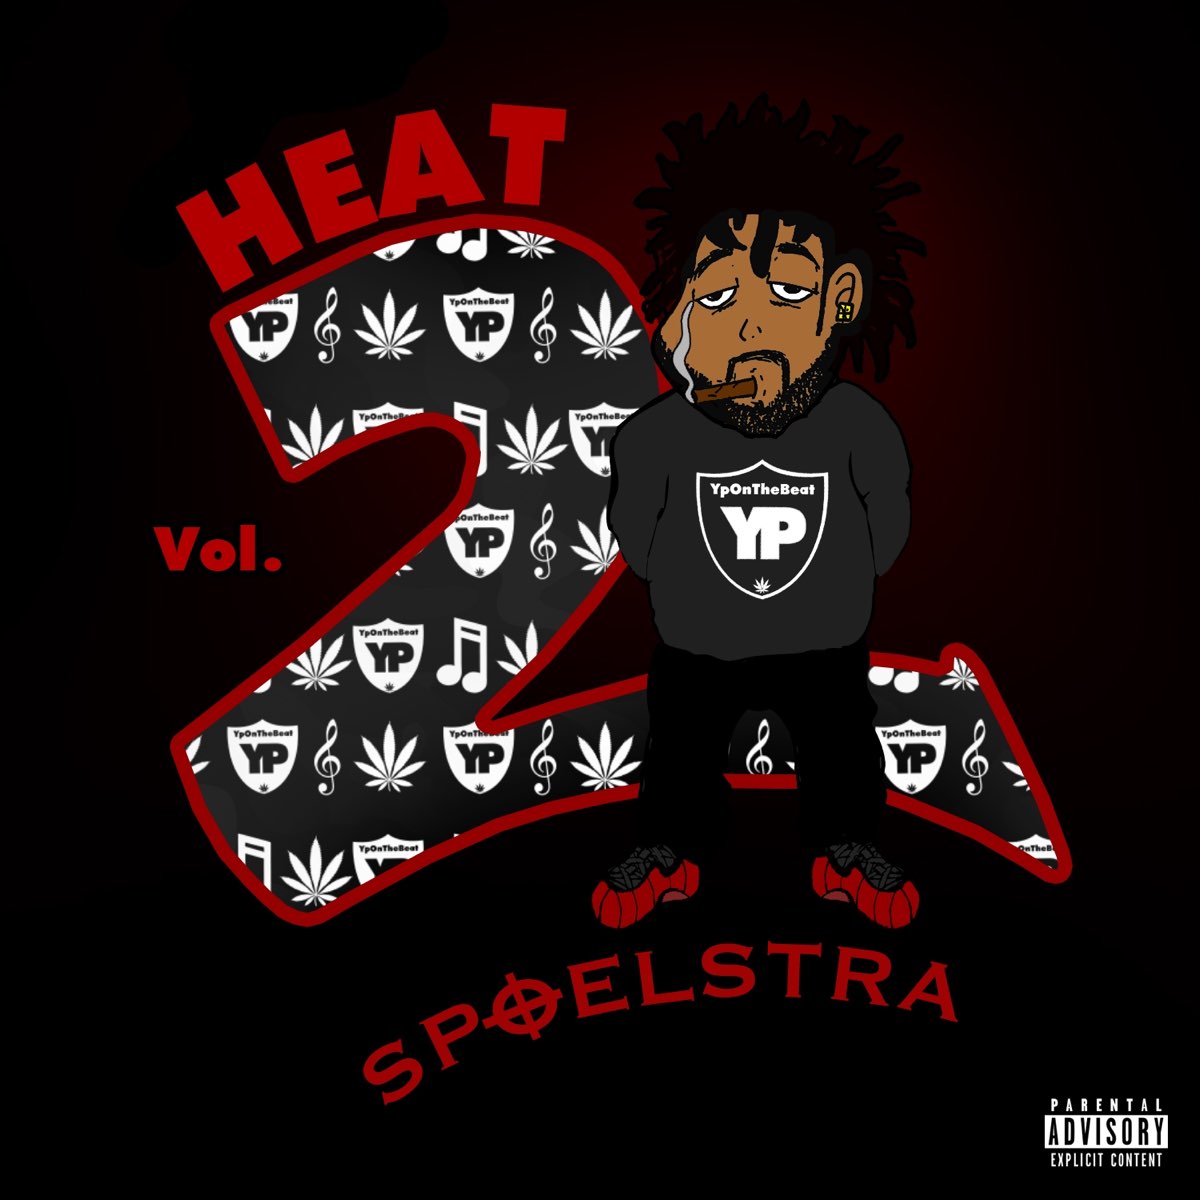 YPOnTheBeat - YP $poelstra: Heat Vol. 2 (Deluxe Edition)